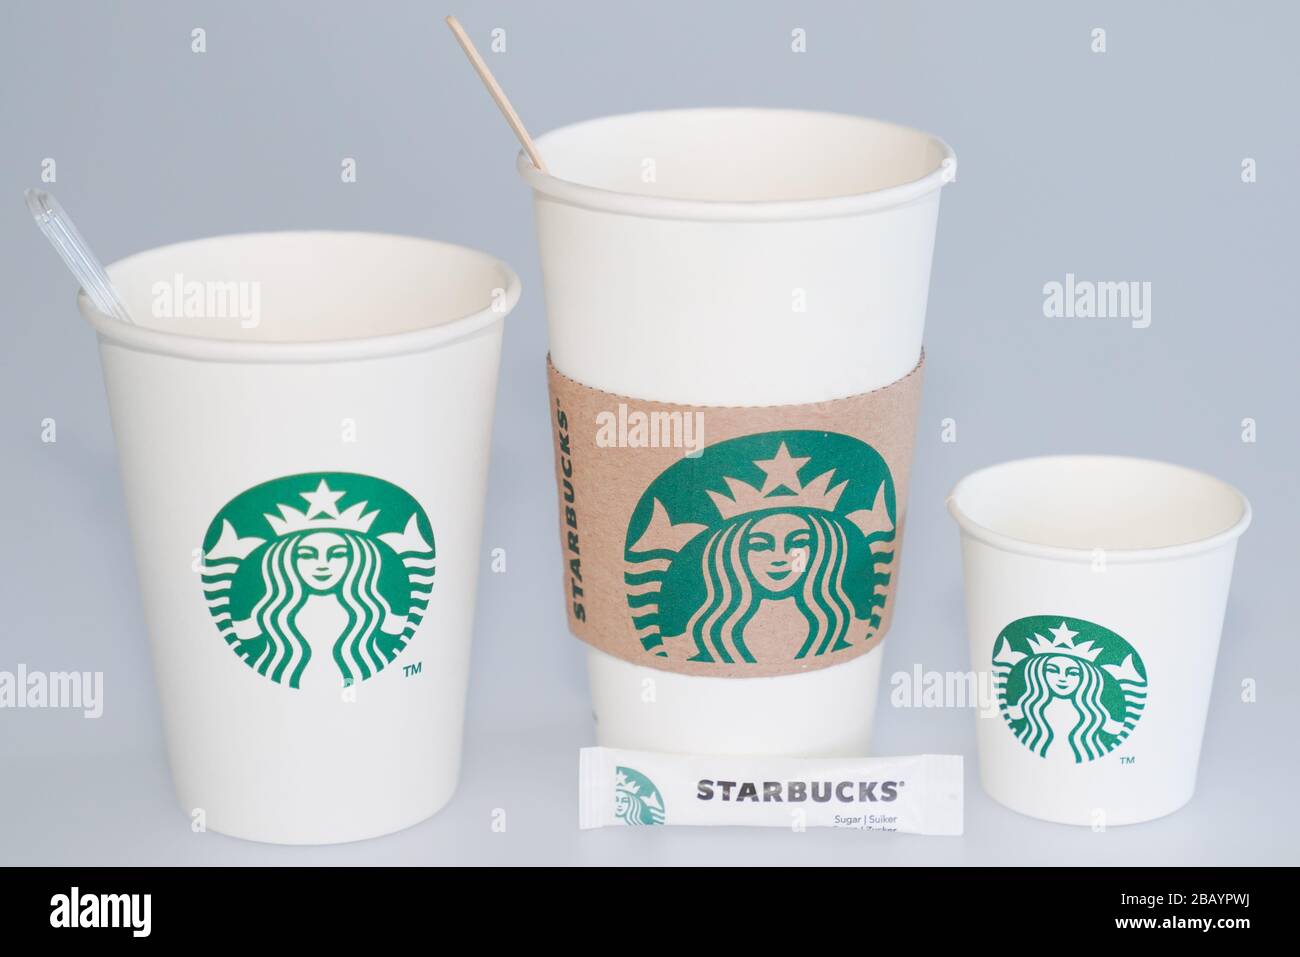 Bordeaux Aquitaine France 03 24 2020 Starbucks Coffee Logo Sign On Coffee Container To Take Away Different Size Cafe Stock Photo Alamy,How Many Milliliters In A Cup Of Liquid